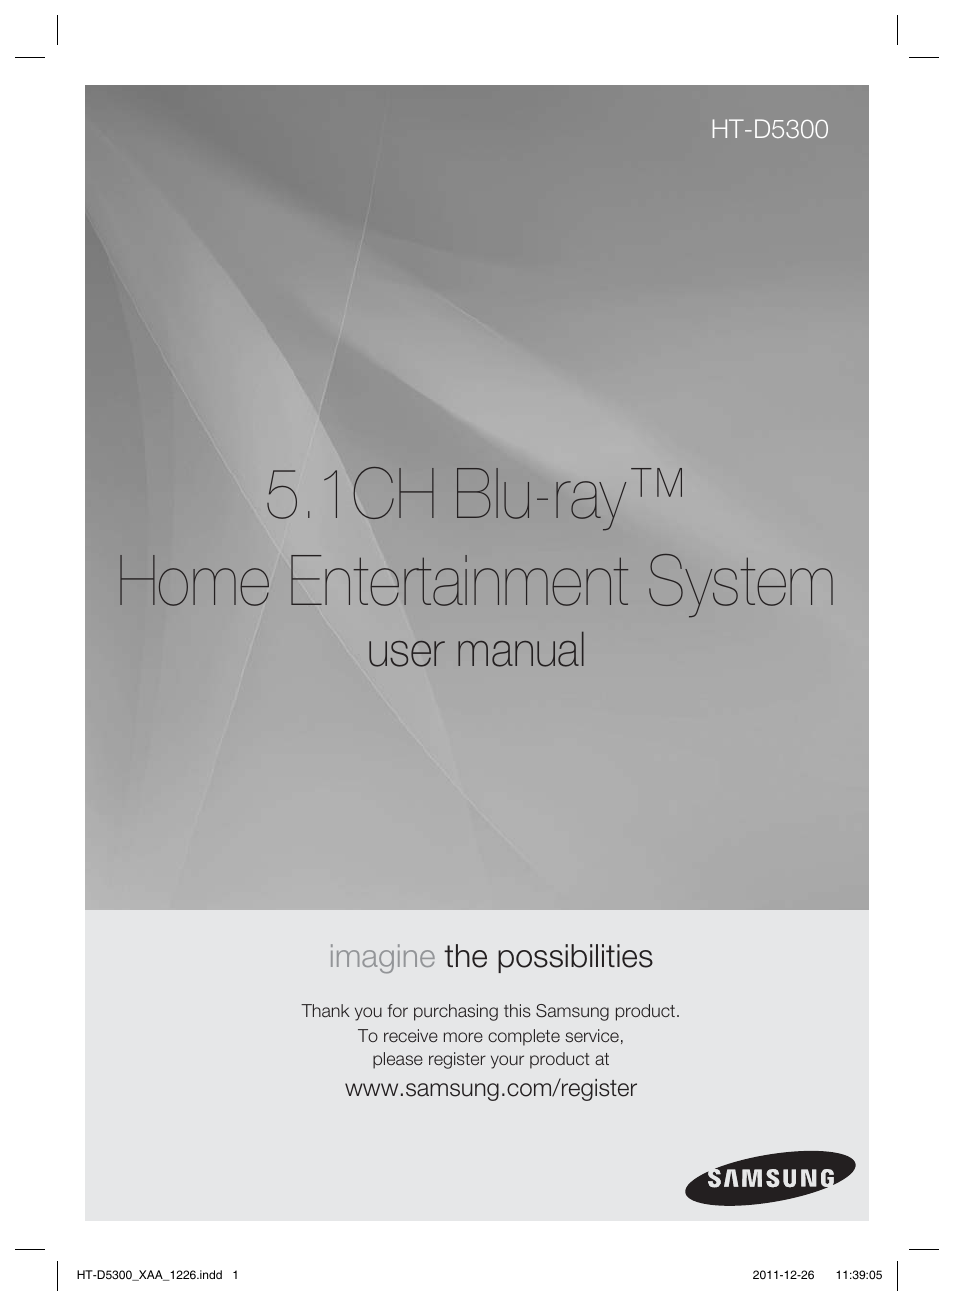 Samsung HT-D5300-ZA User Manual | 85 pages